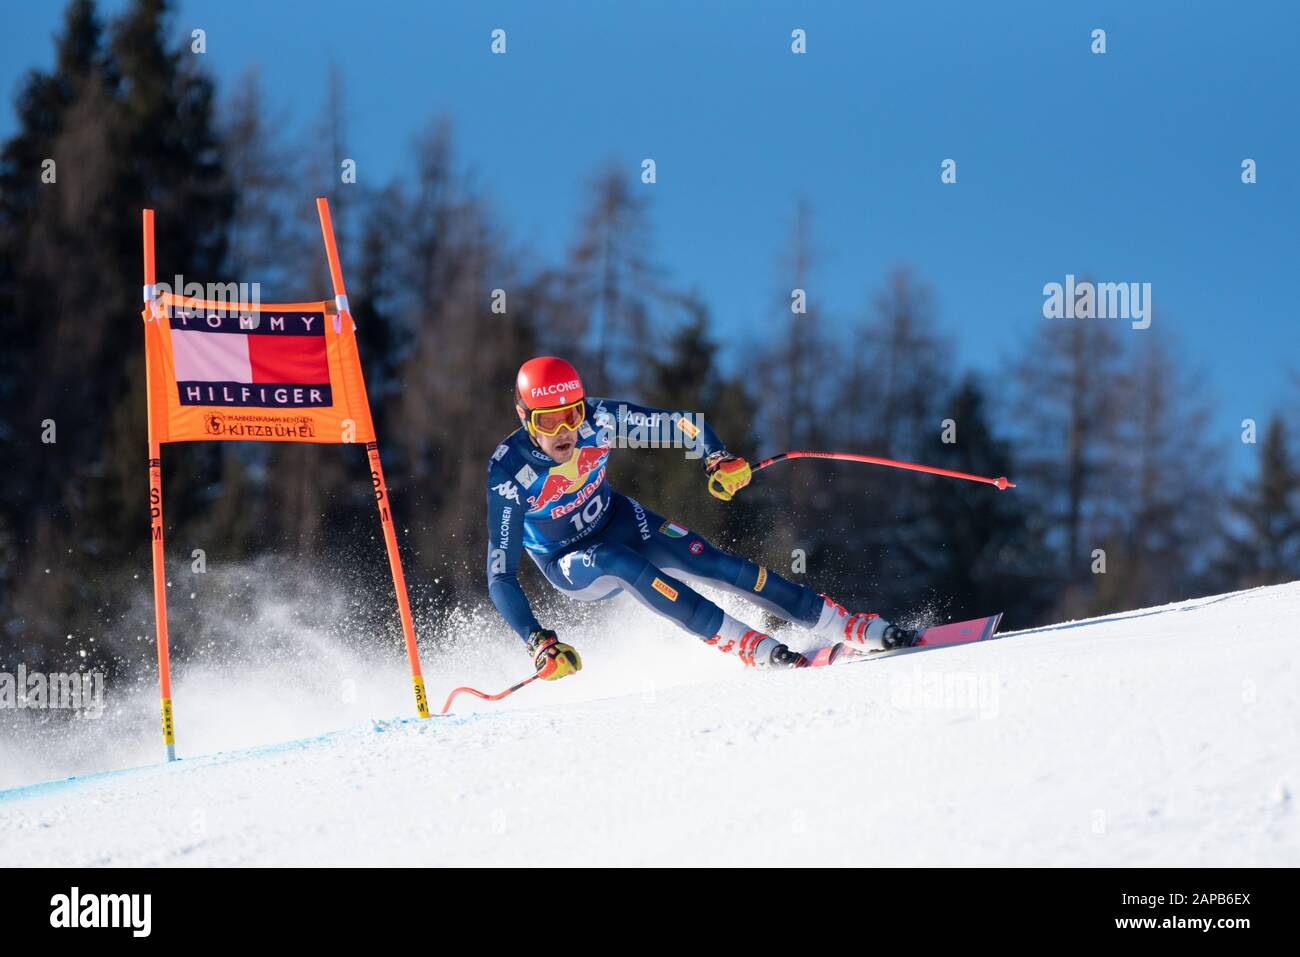 Christof Innerhofer of Italy at the Ski Alpin: 80. Hahnenkamm Race 2020 - Audi FIS Alpine Ski World Cup - Men's Downhill Training at the Streif on January 22, 2020 in Kitzbuehel, AUSTRIA. (Photo by Horst Ettensberger/ESPA-Images) Stock Photo